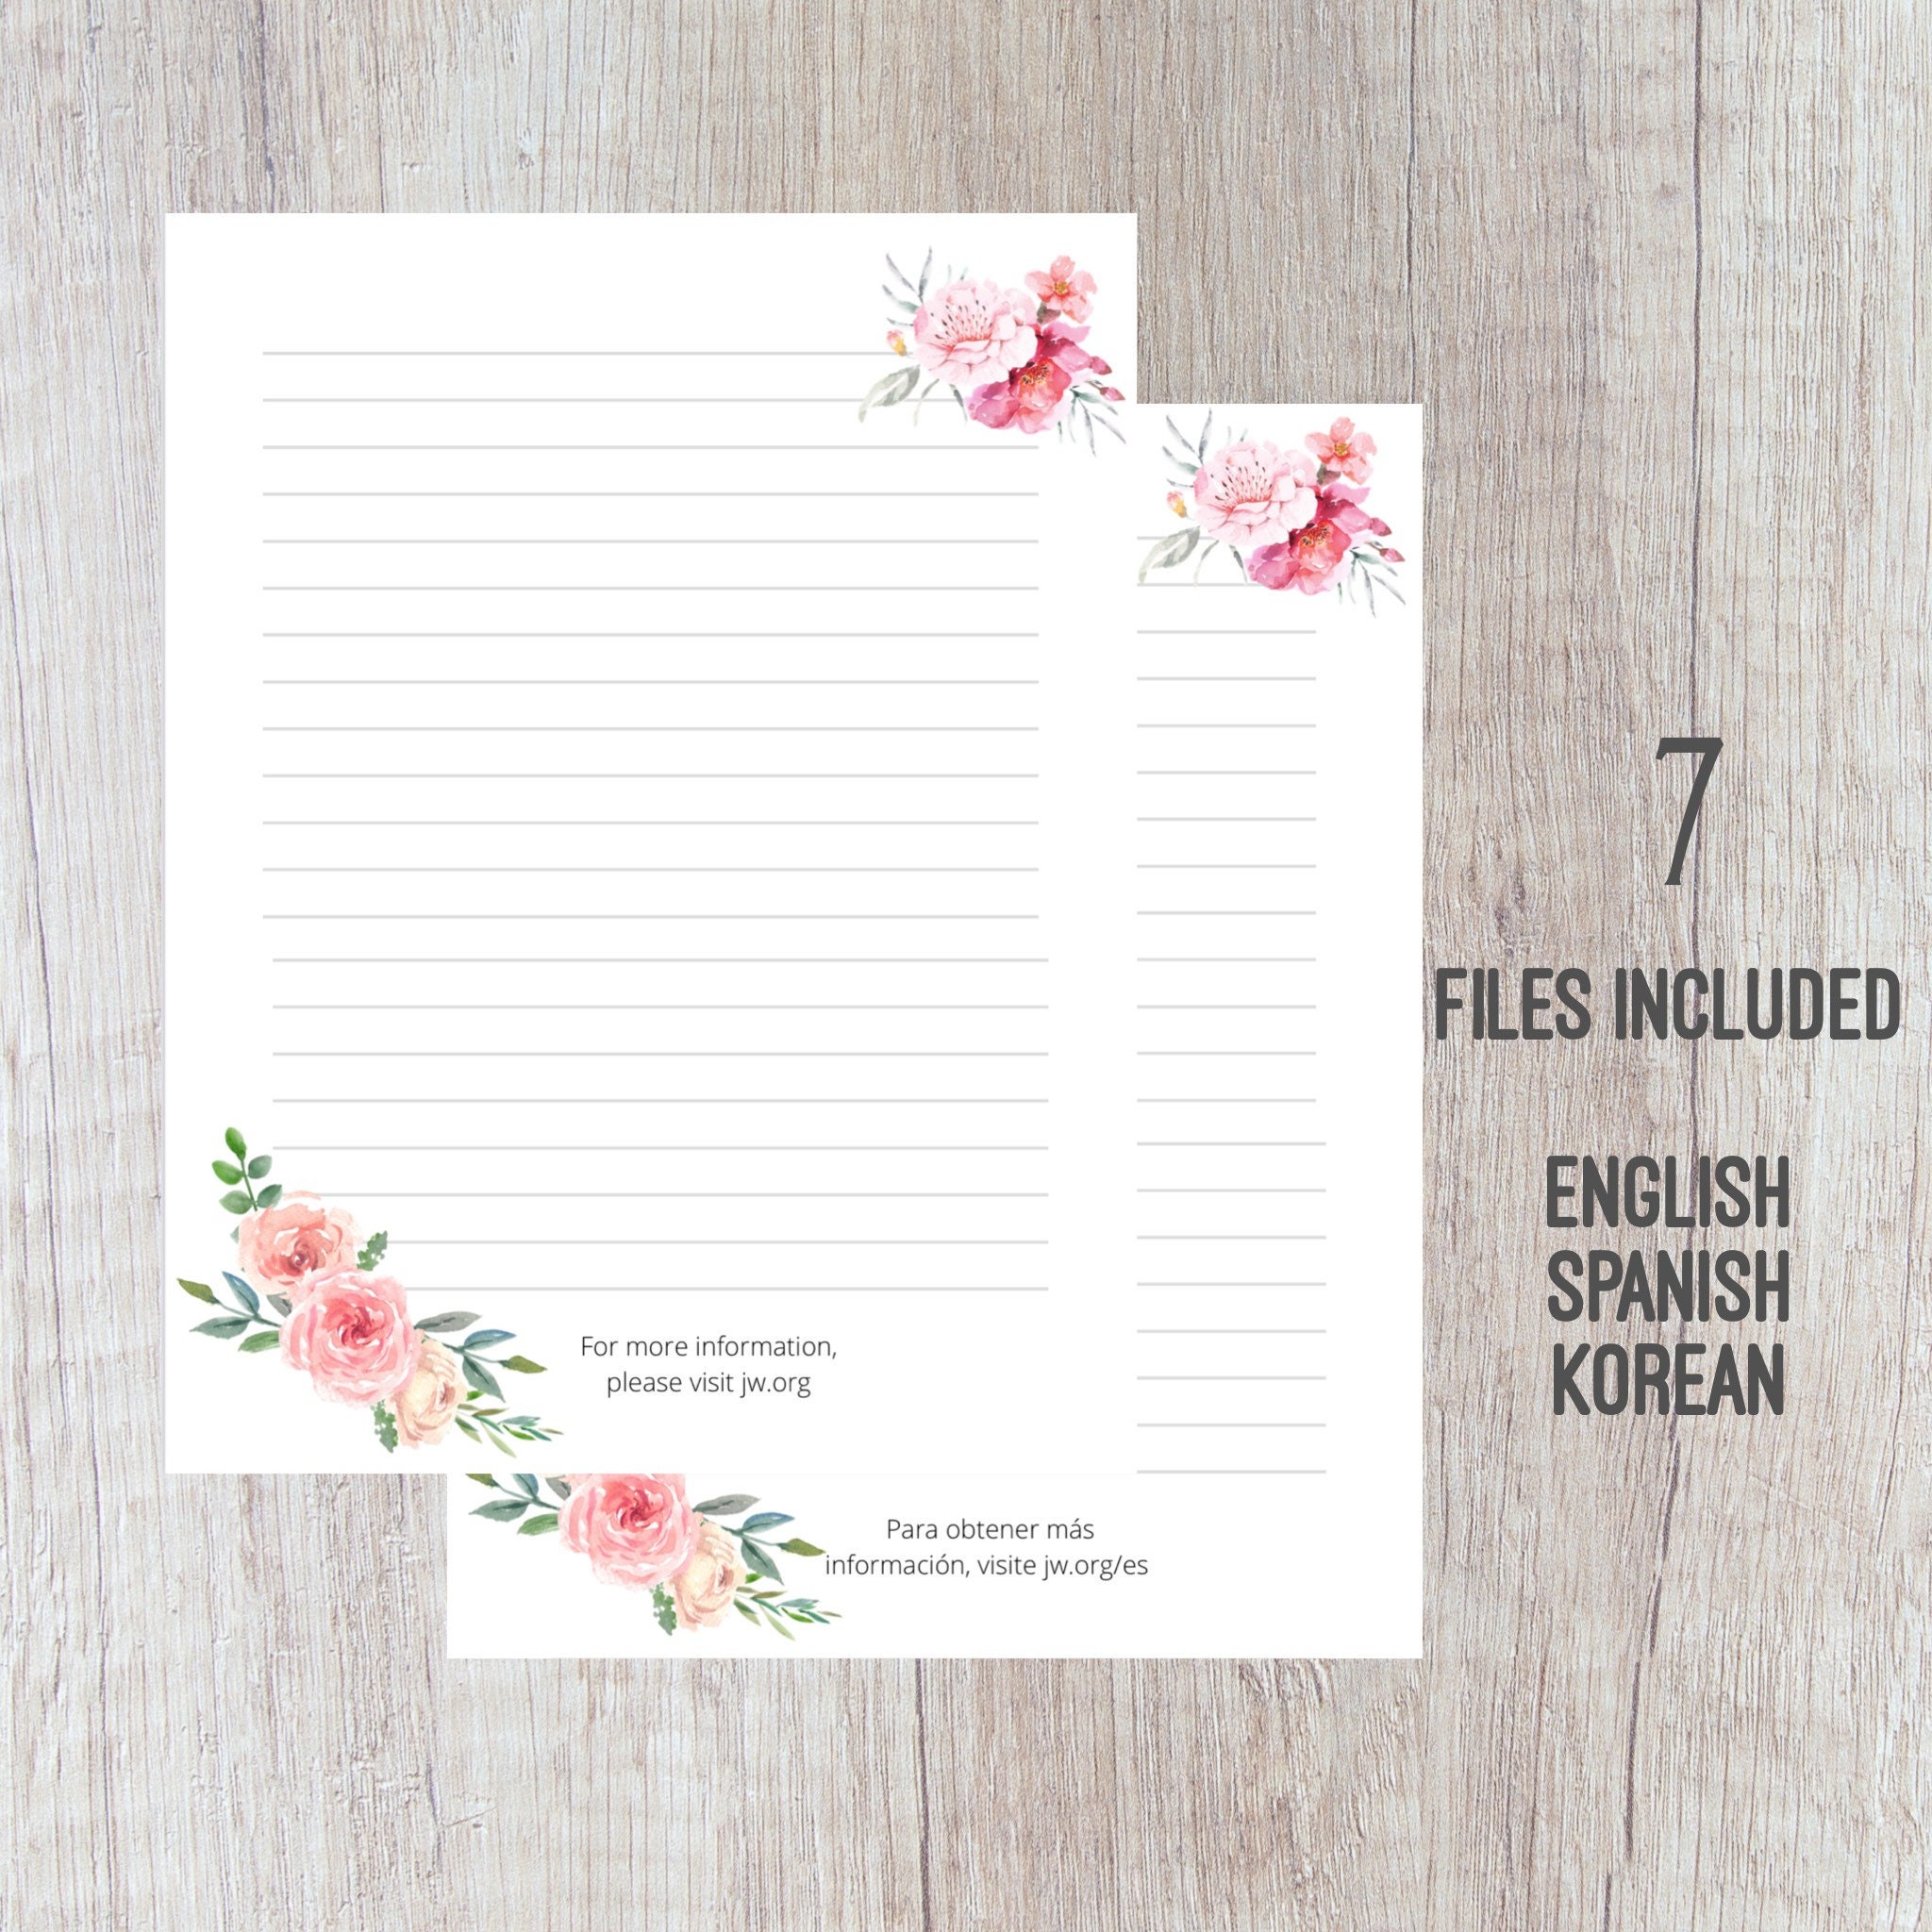  JW Letter Writing A4 Pad Stationery Paper Lined Gift